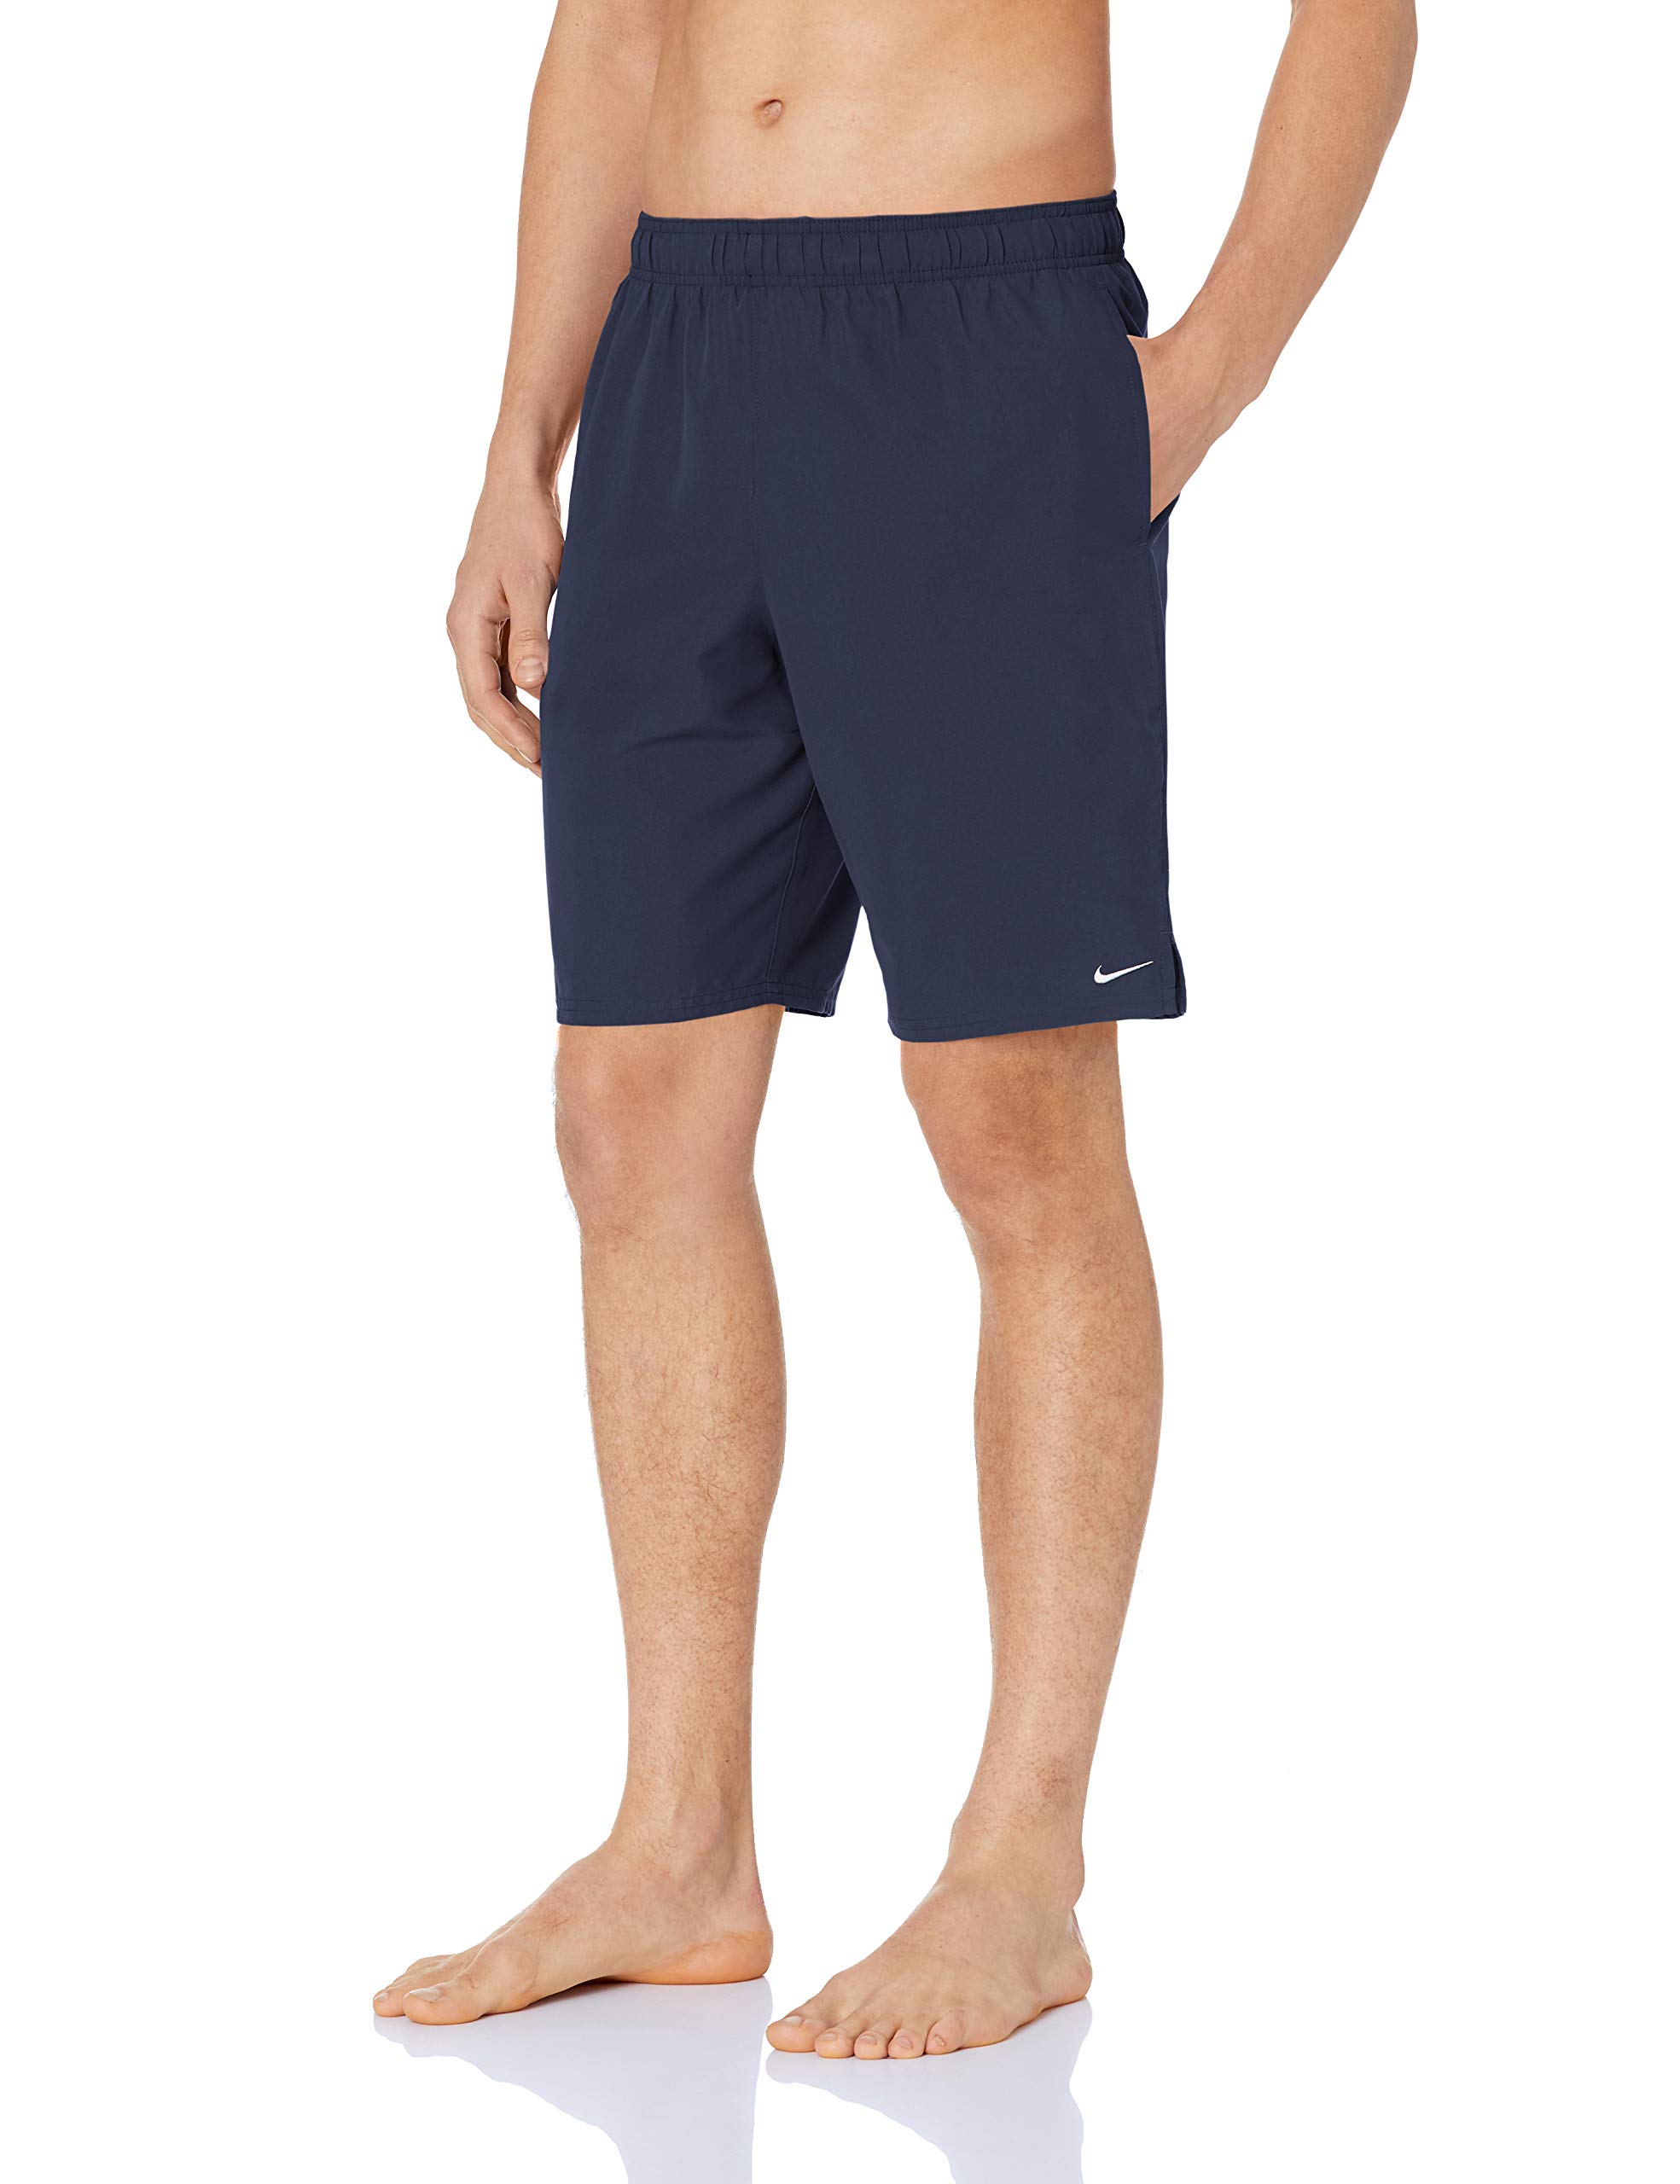 Nike Mens Solid Lap 9 Inch Volley Short Swim Trunk - Midnight Navy White - L